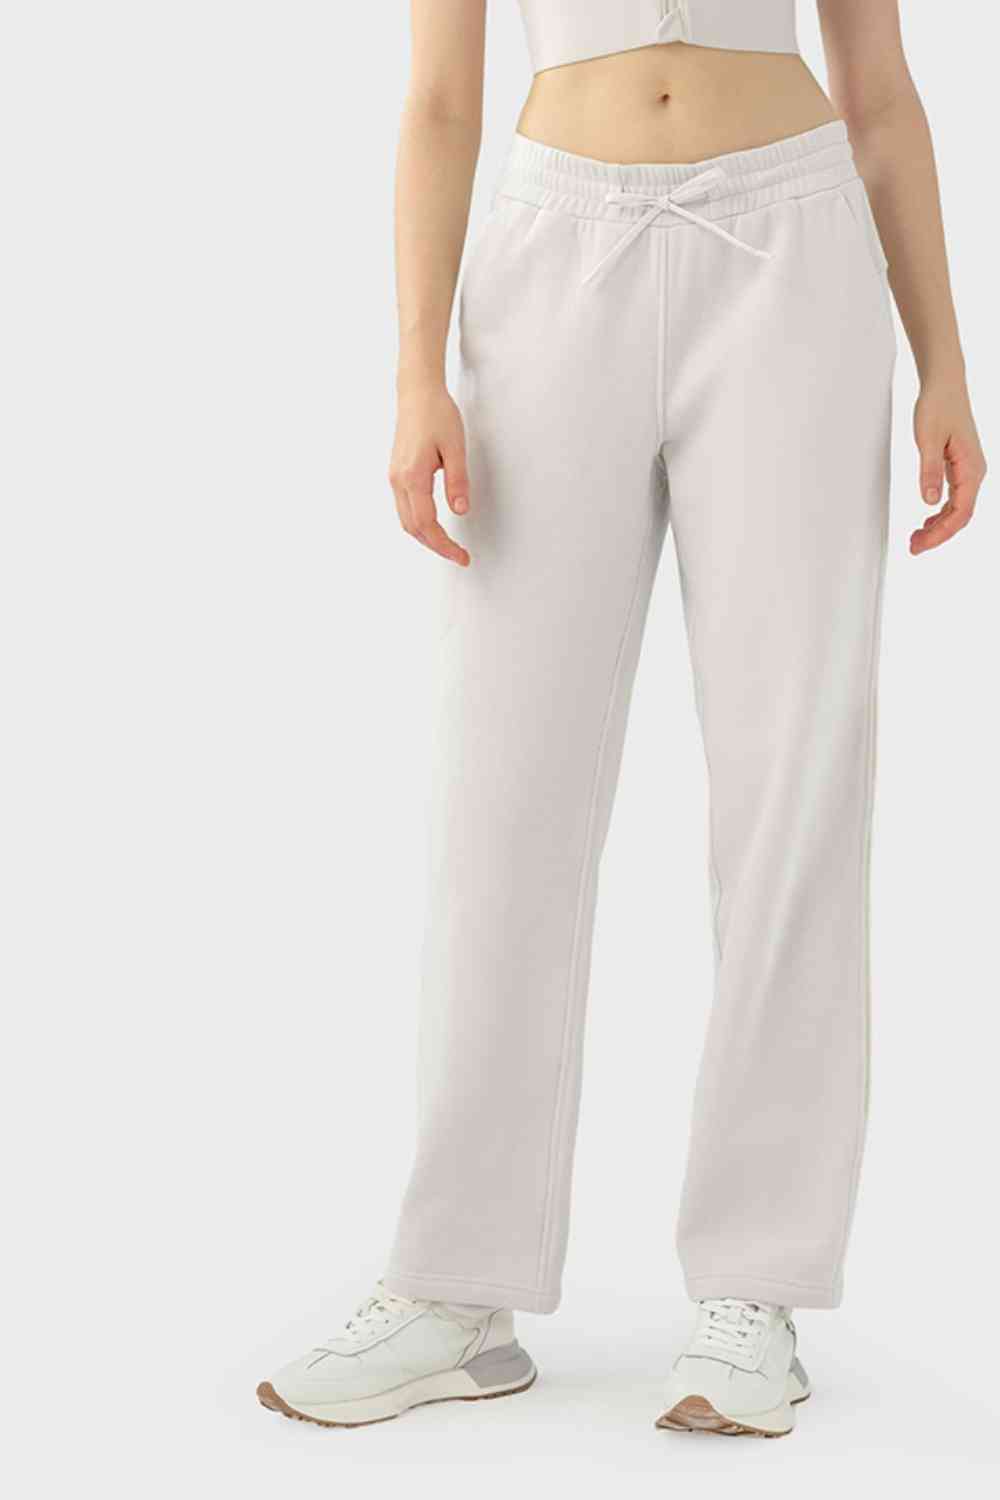 Drawstring Waist Sports Pants with Pockets BLUE ZONE PLANET